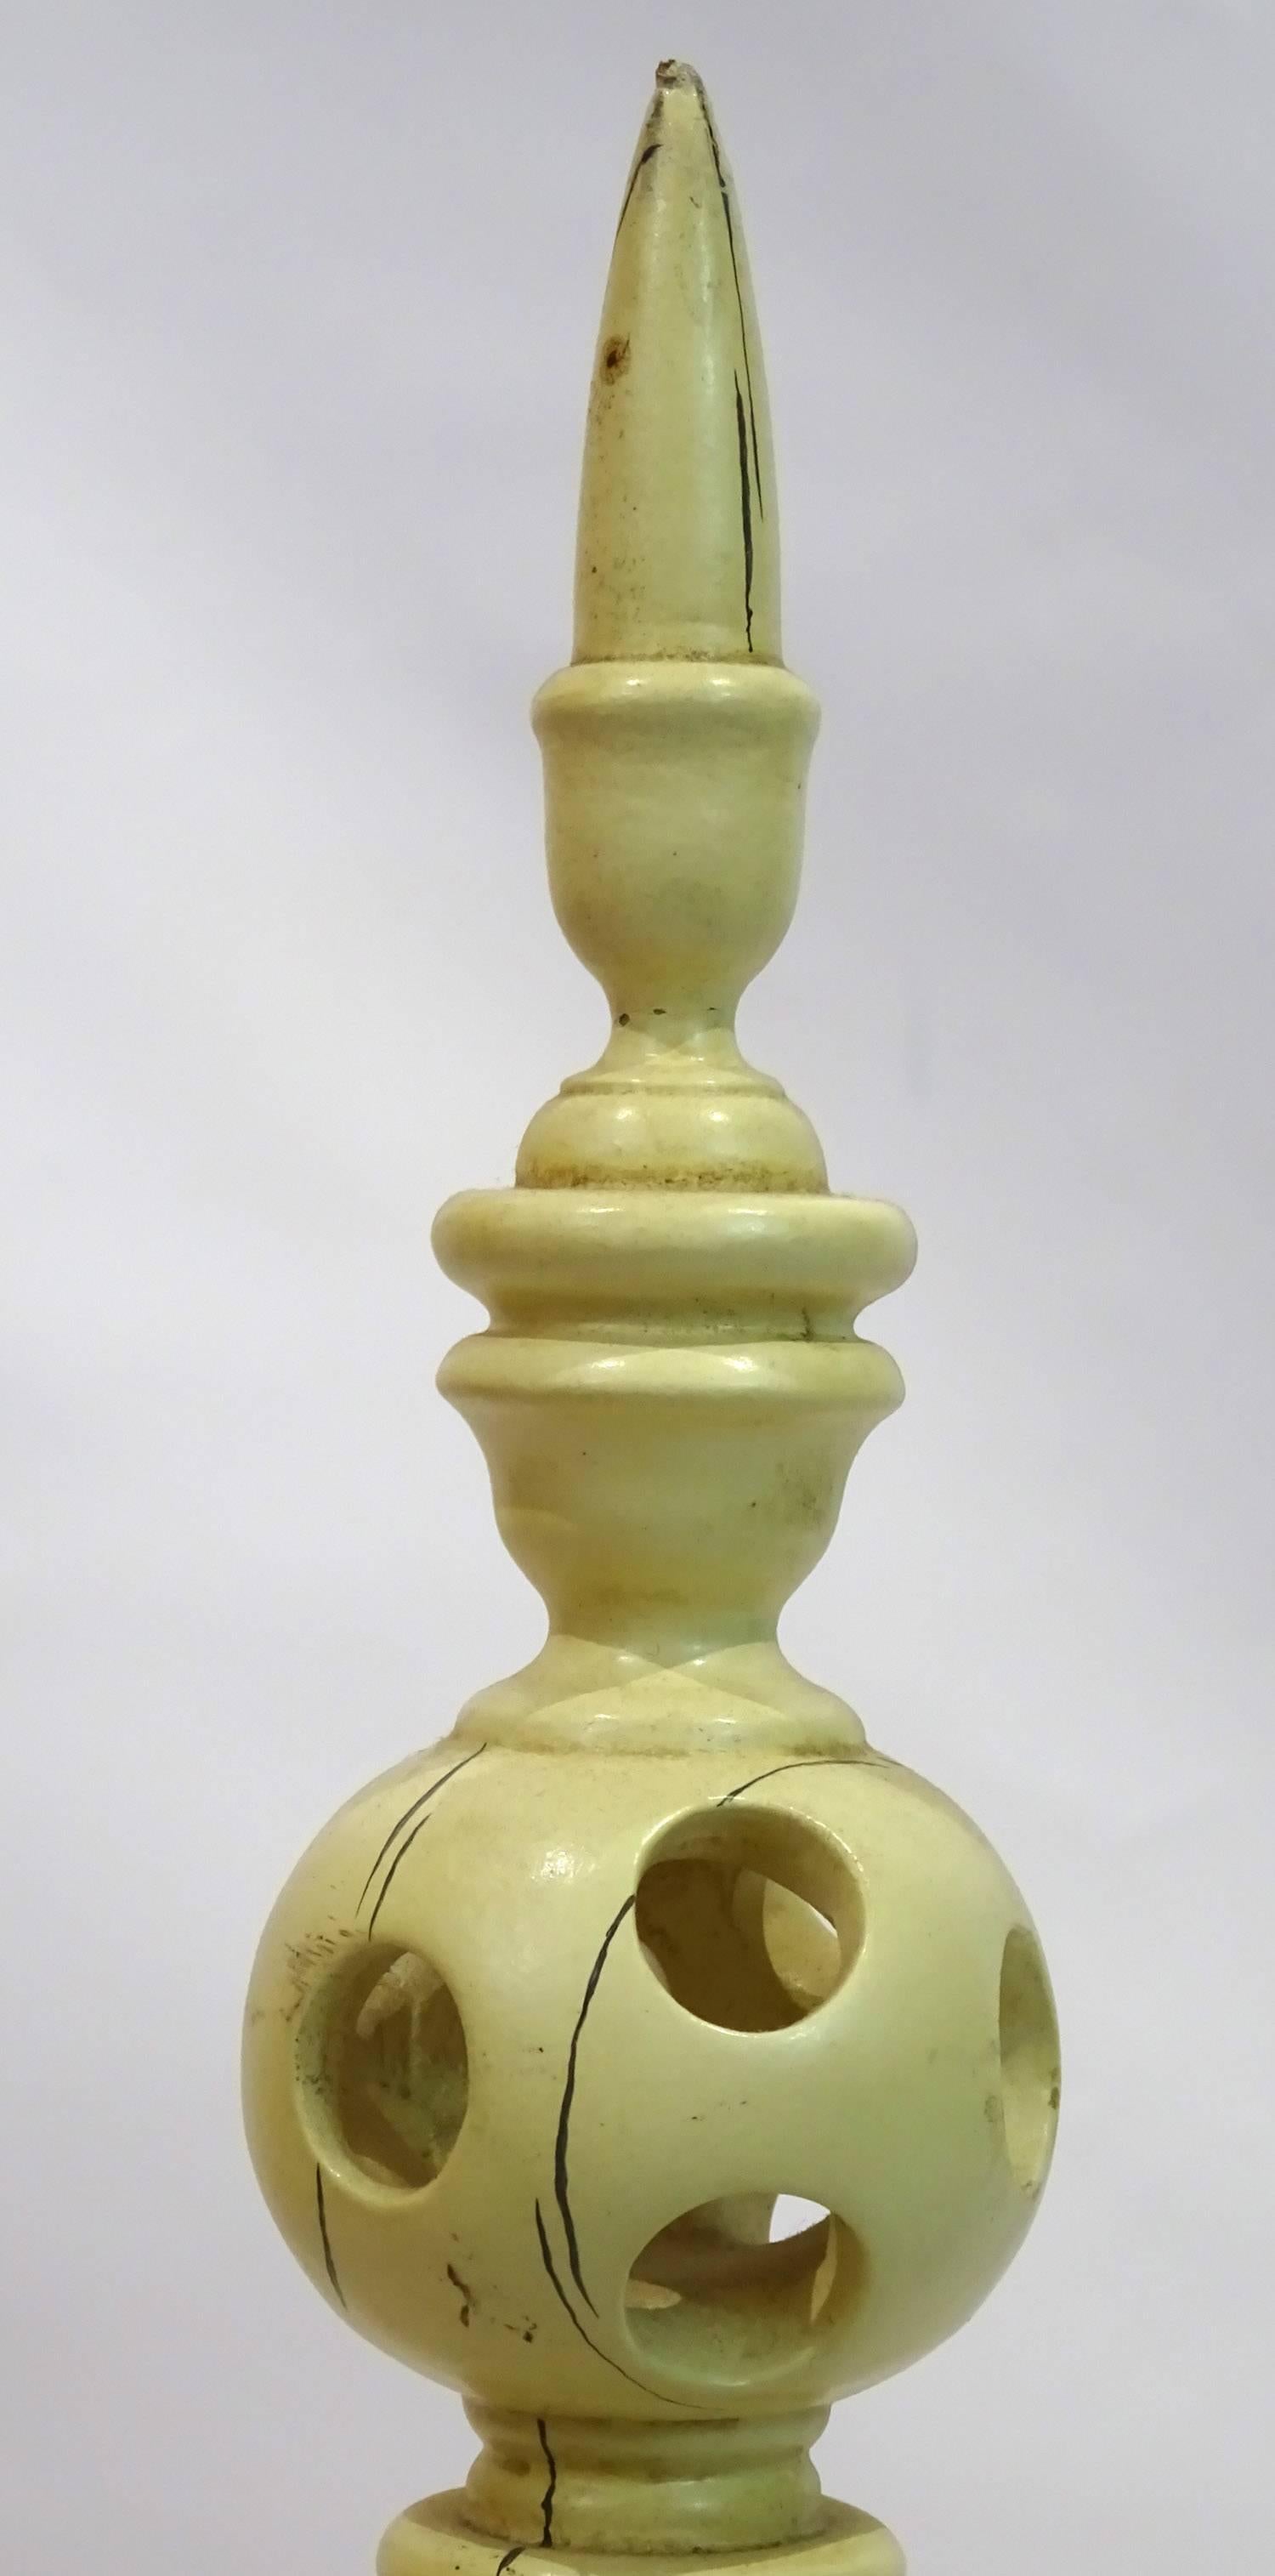 20th century continental faux ivory carved wooden finial with painted stress cracks on the surface.

